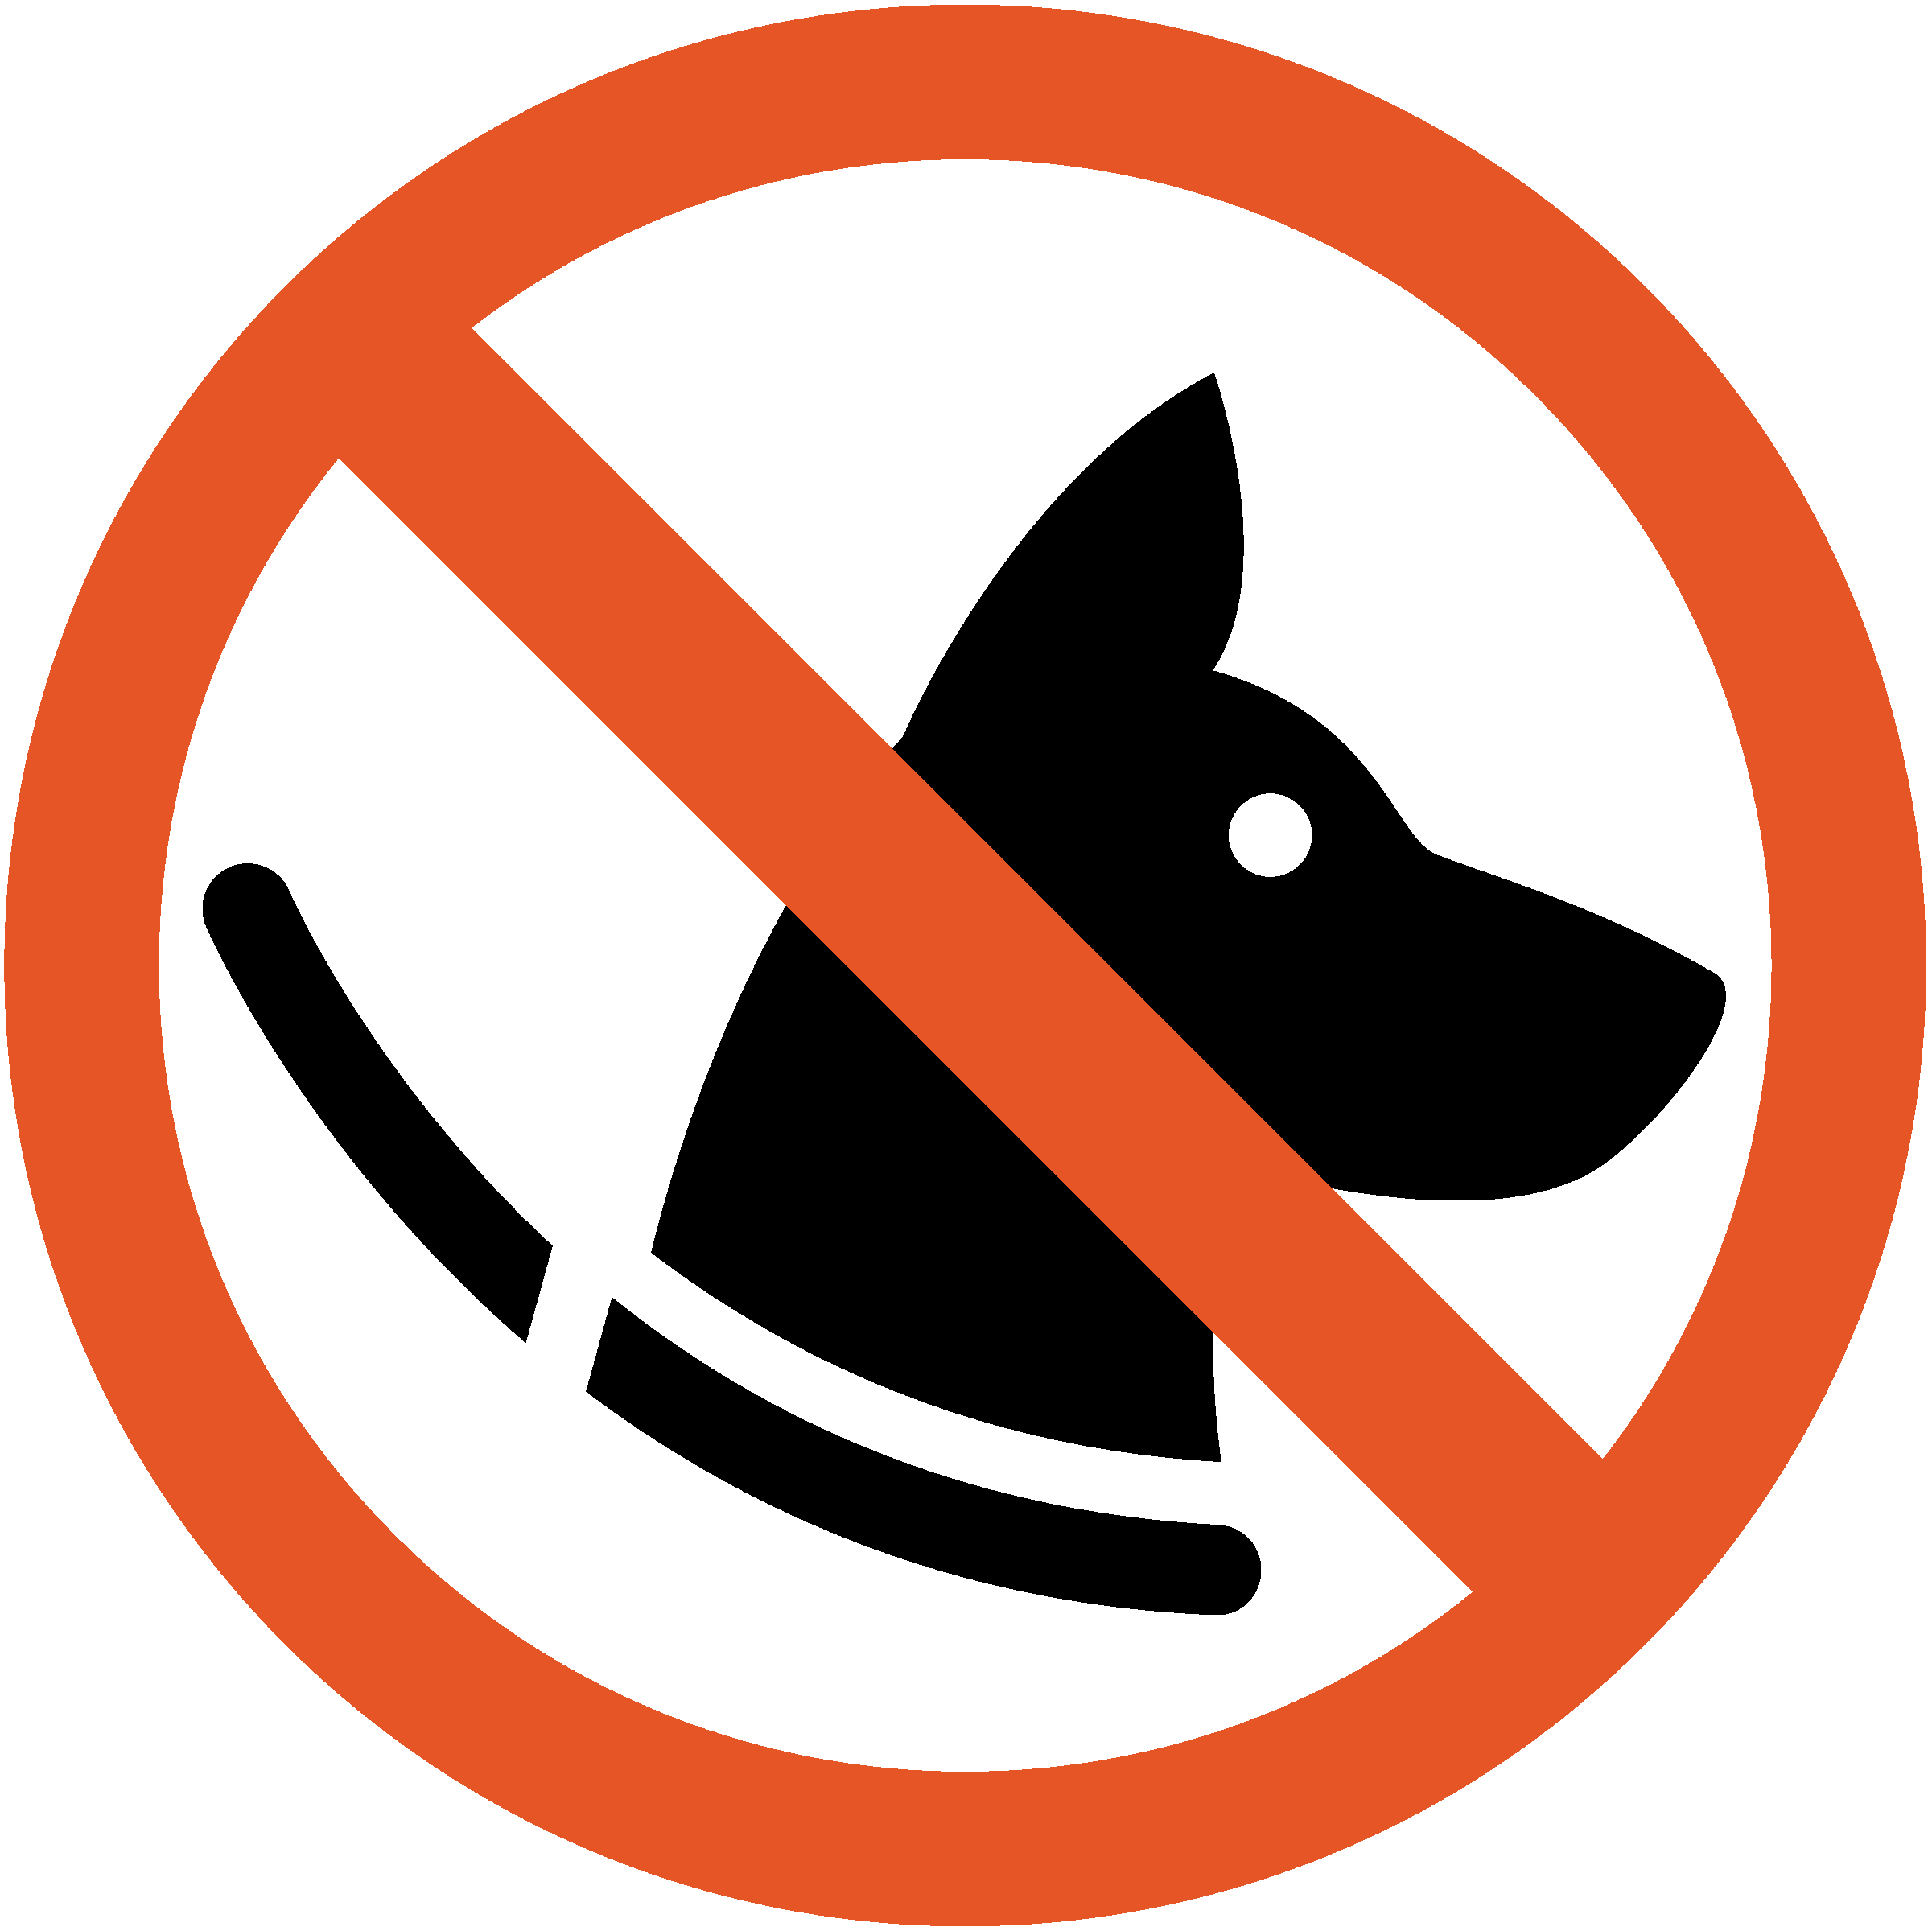 icon of no symbol over image of dog